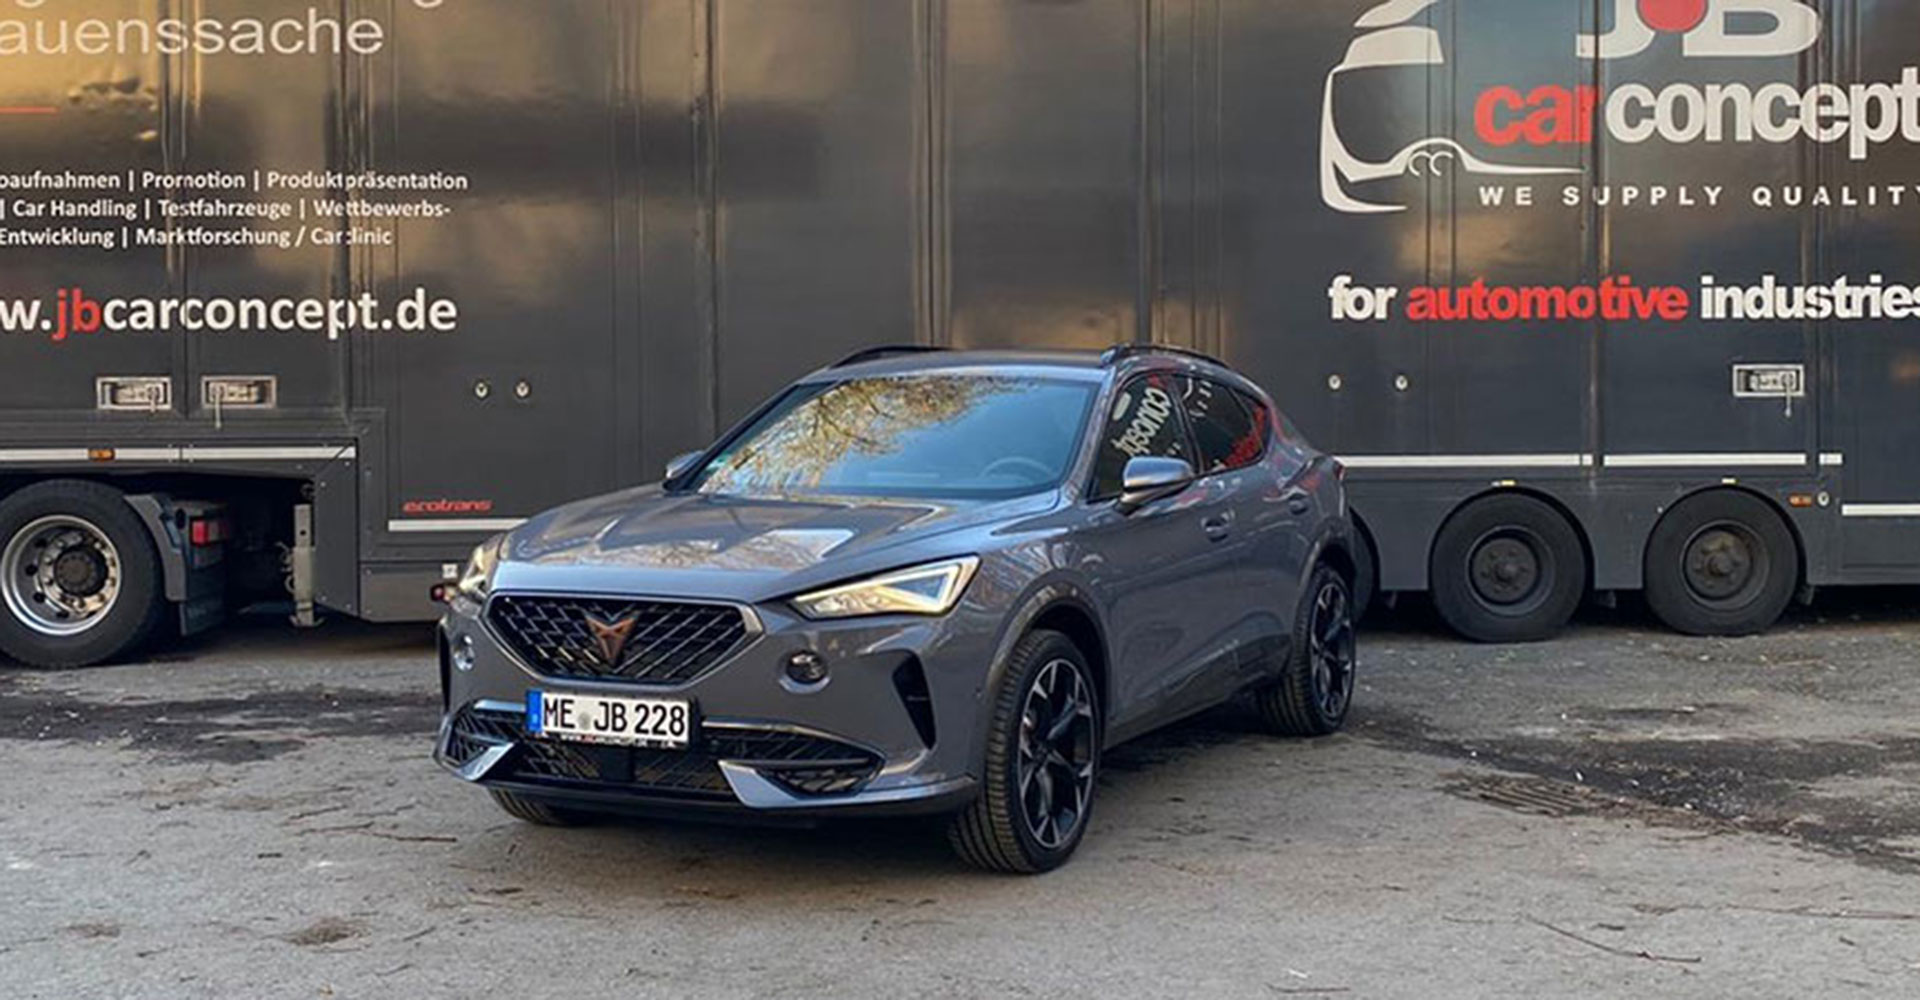 Seat’s Cupra Formentor is bookable immediately at CarConcept